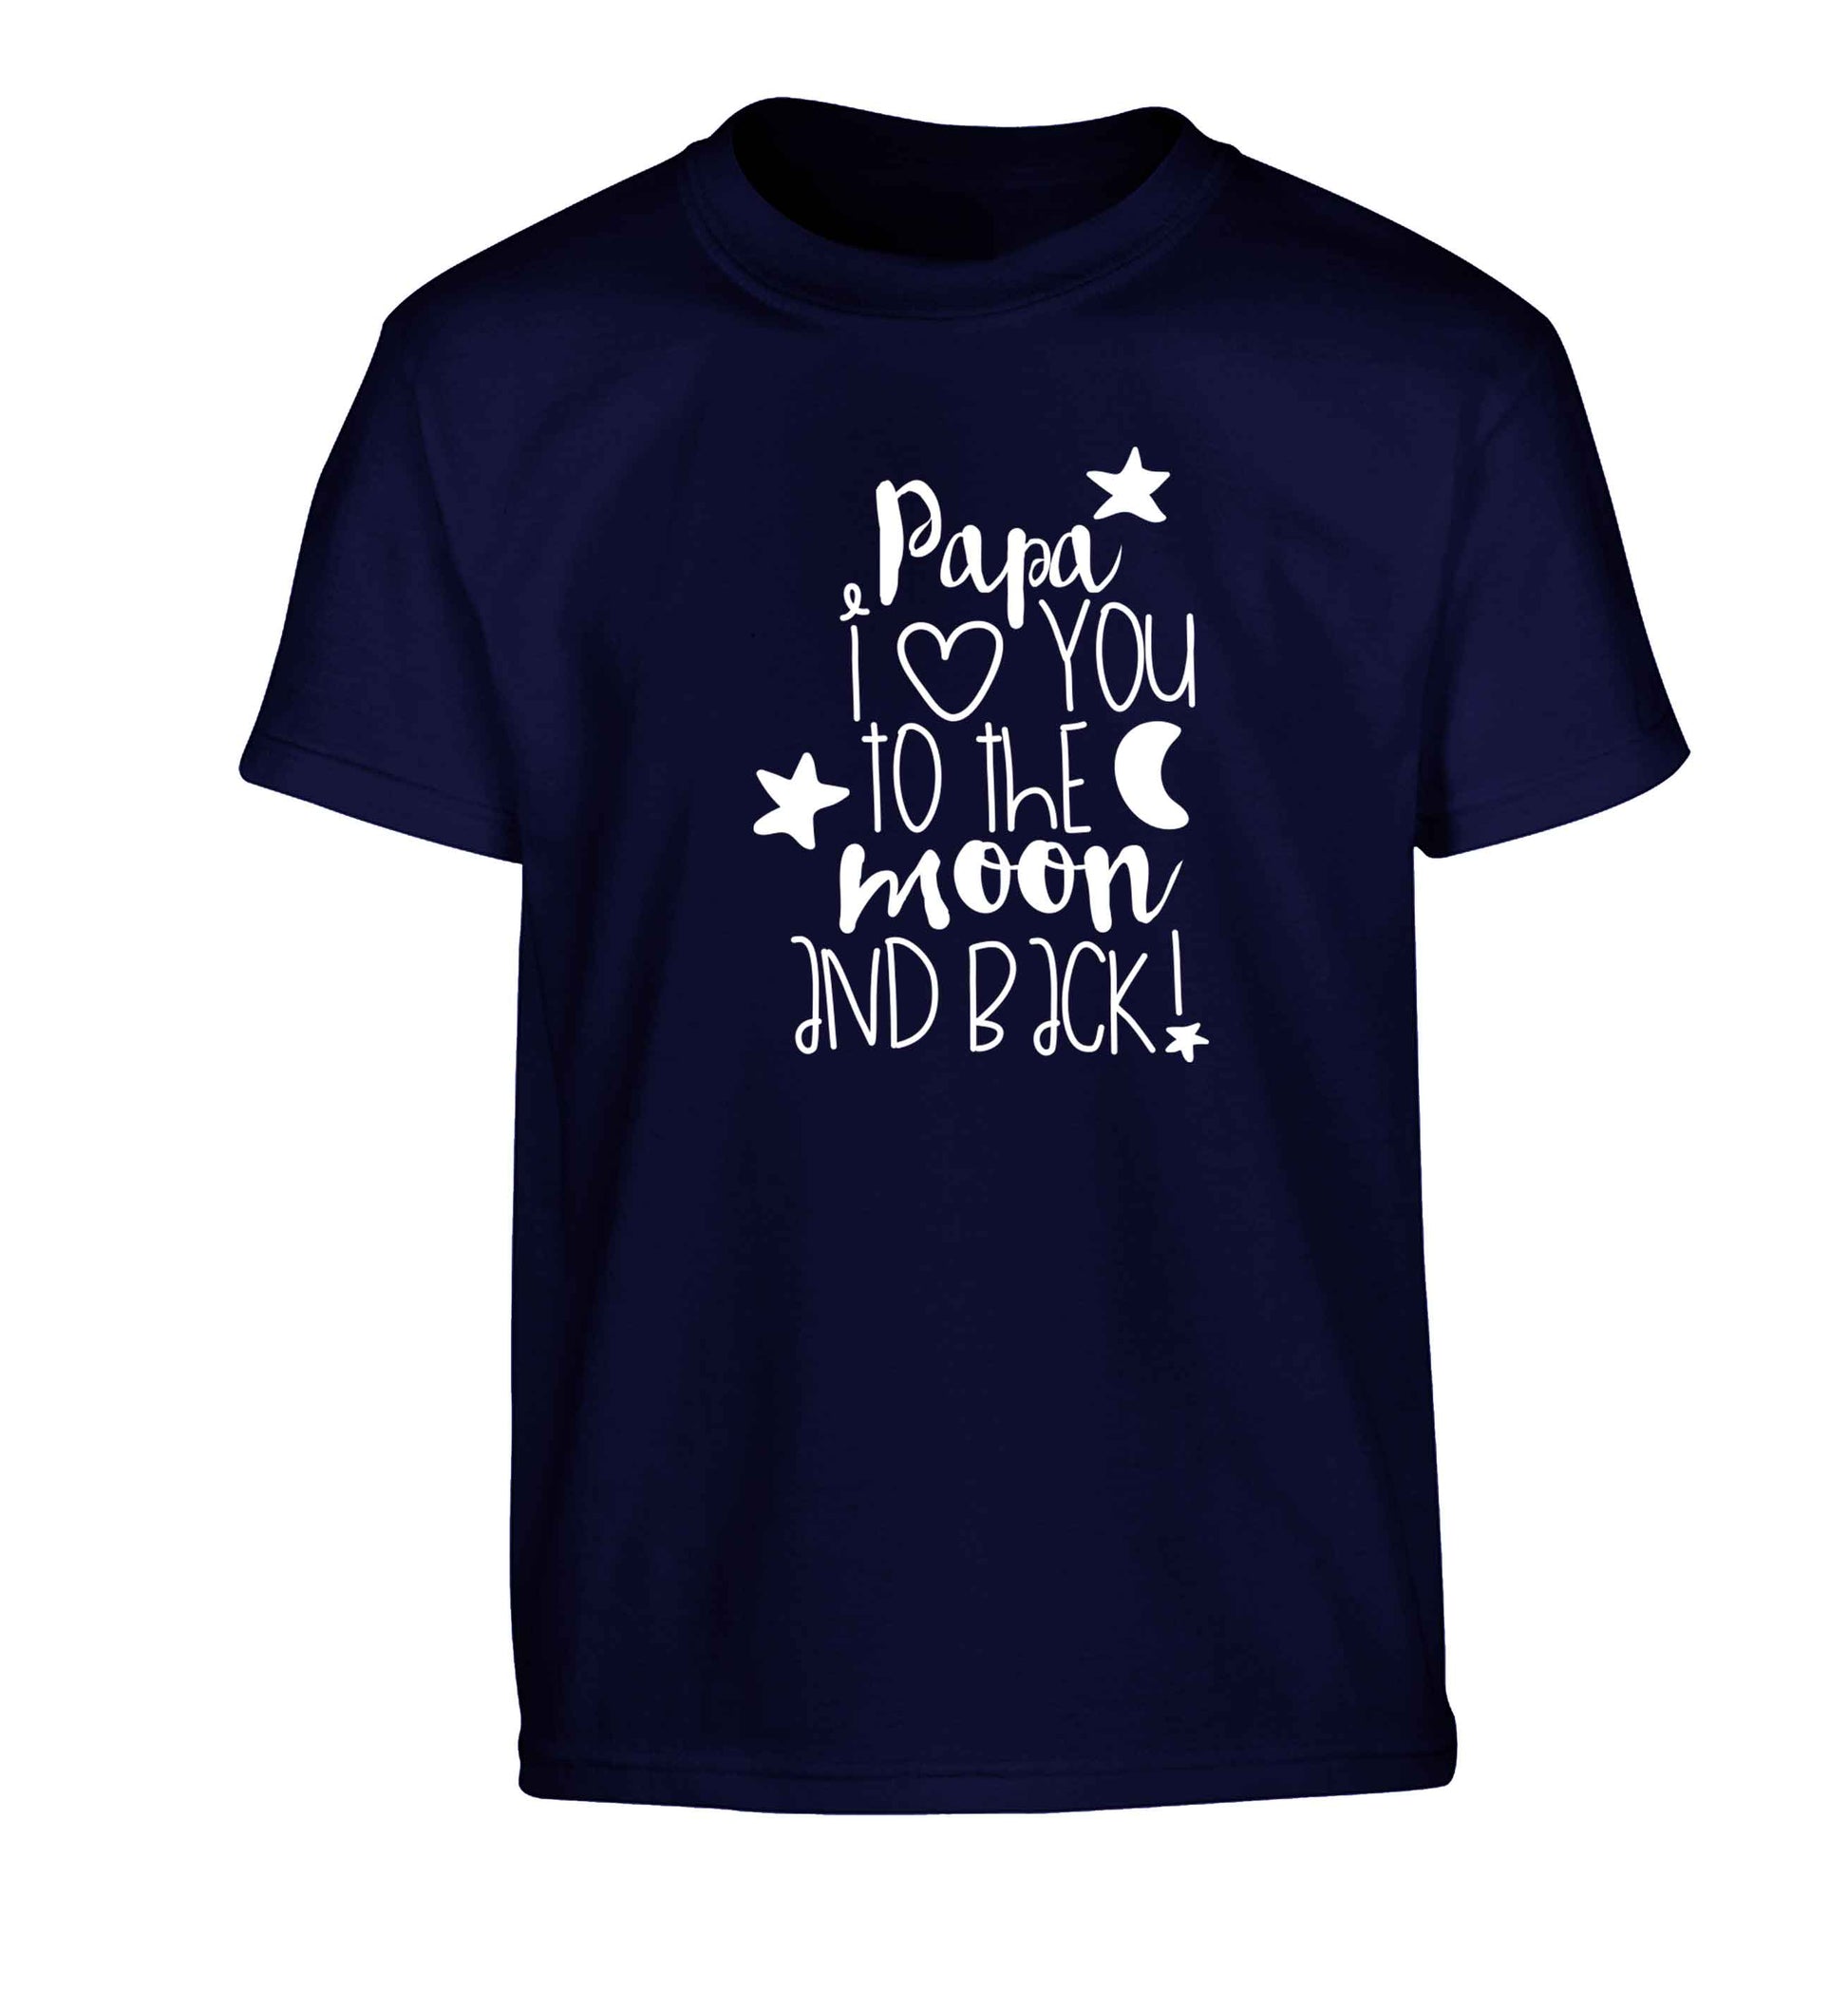 Papa I love you to the moon and back Children's navy Tshirt 12-13 Years